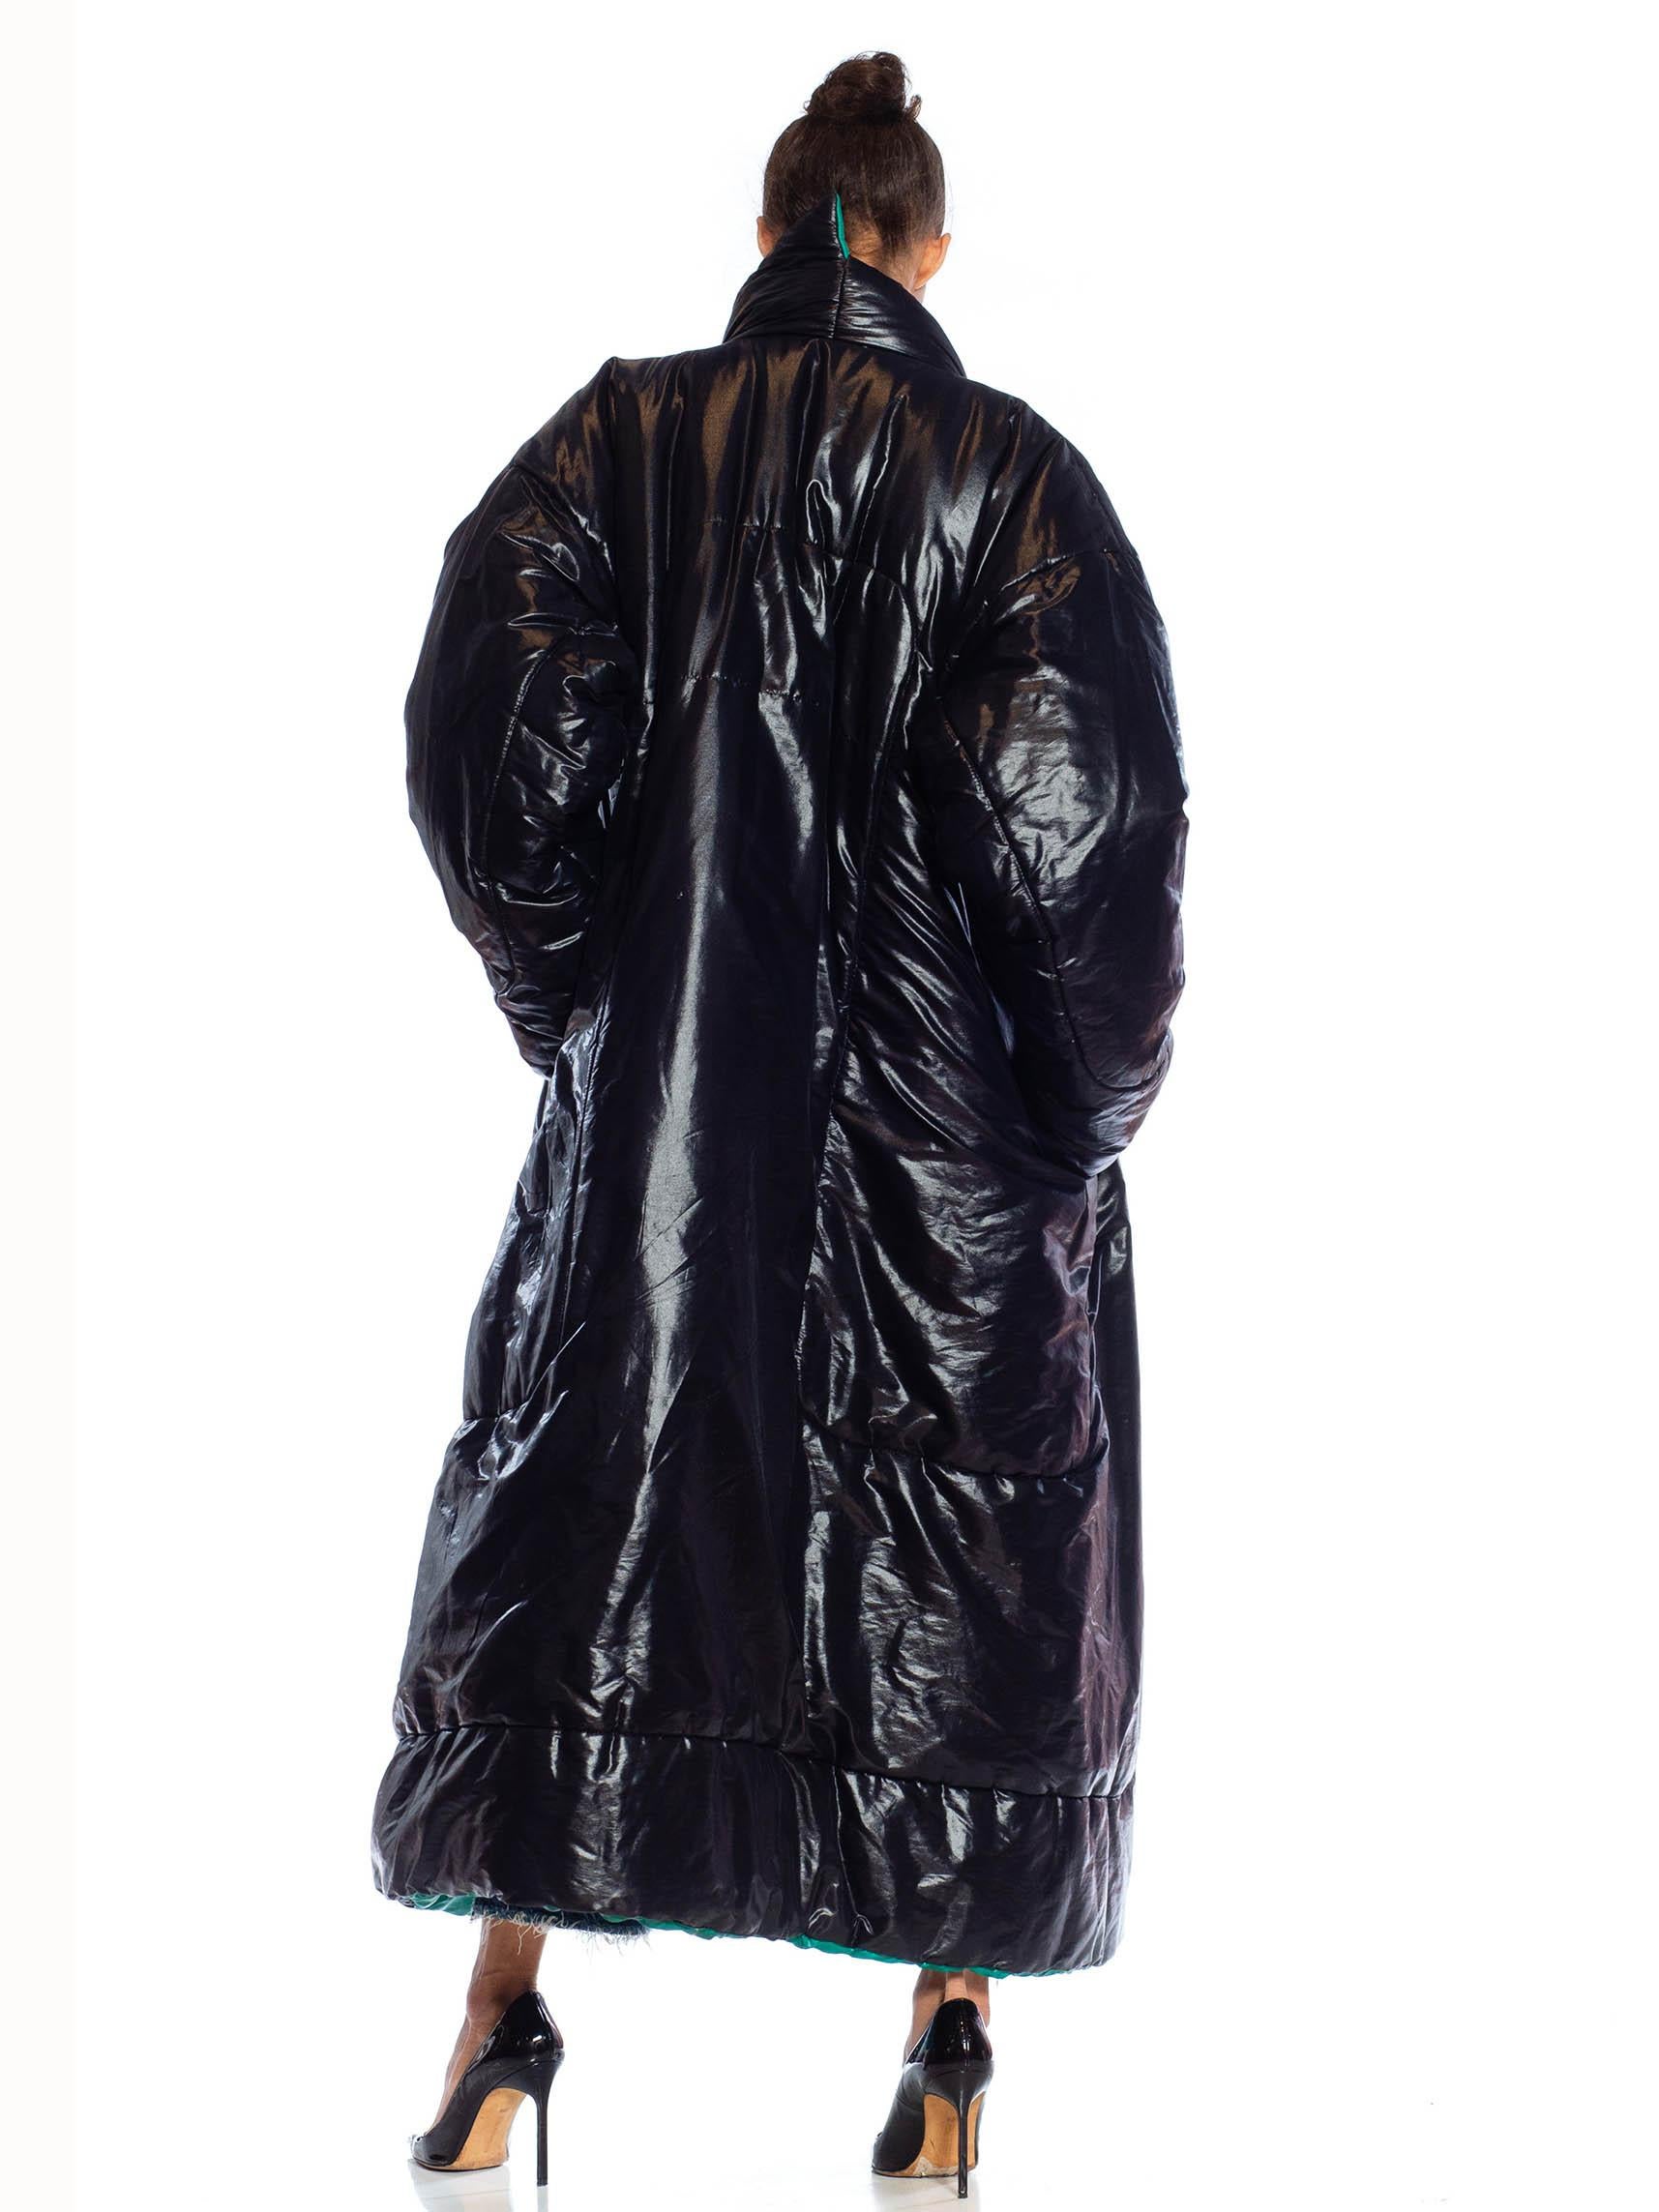 1980S NORMA KAMALI Black & Green Nylon Sleeping Bag Coat In Excellent Condition For Sale In New York, NY